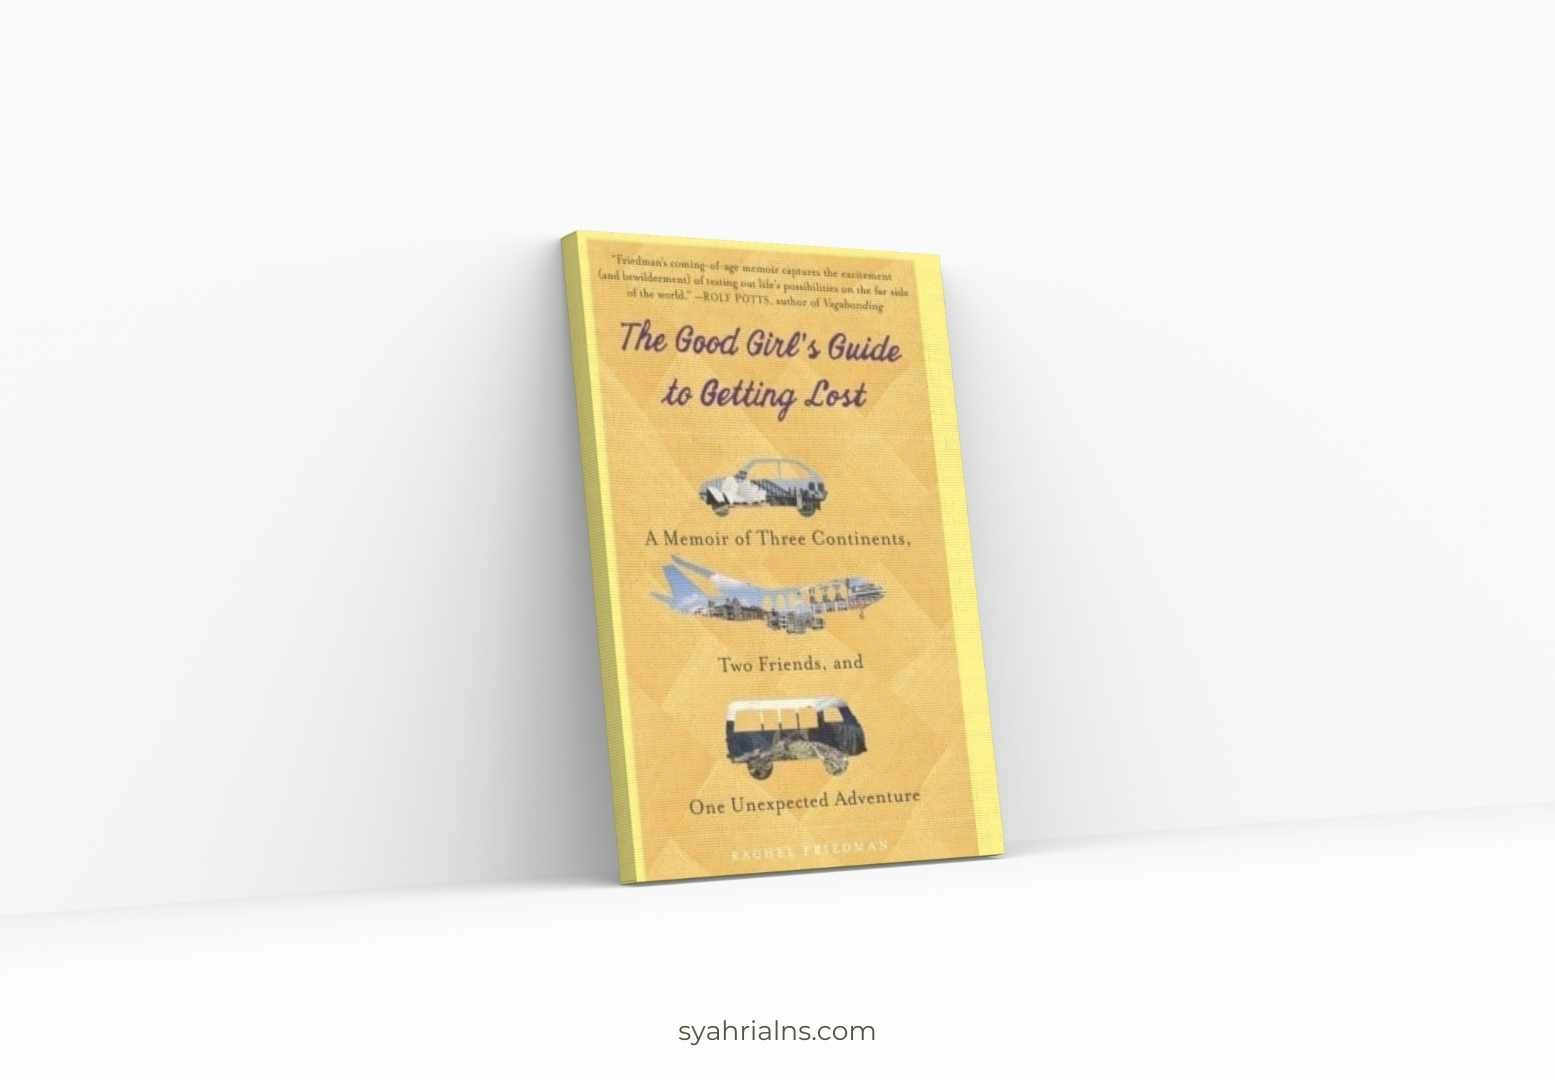 The Good Girl’s Guide to Getting Lost by Rachel Friedman (Books Like Eat Pray Love)